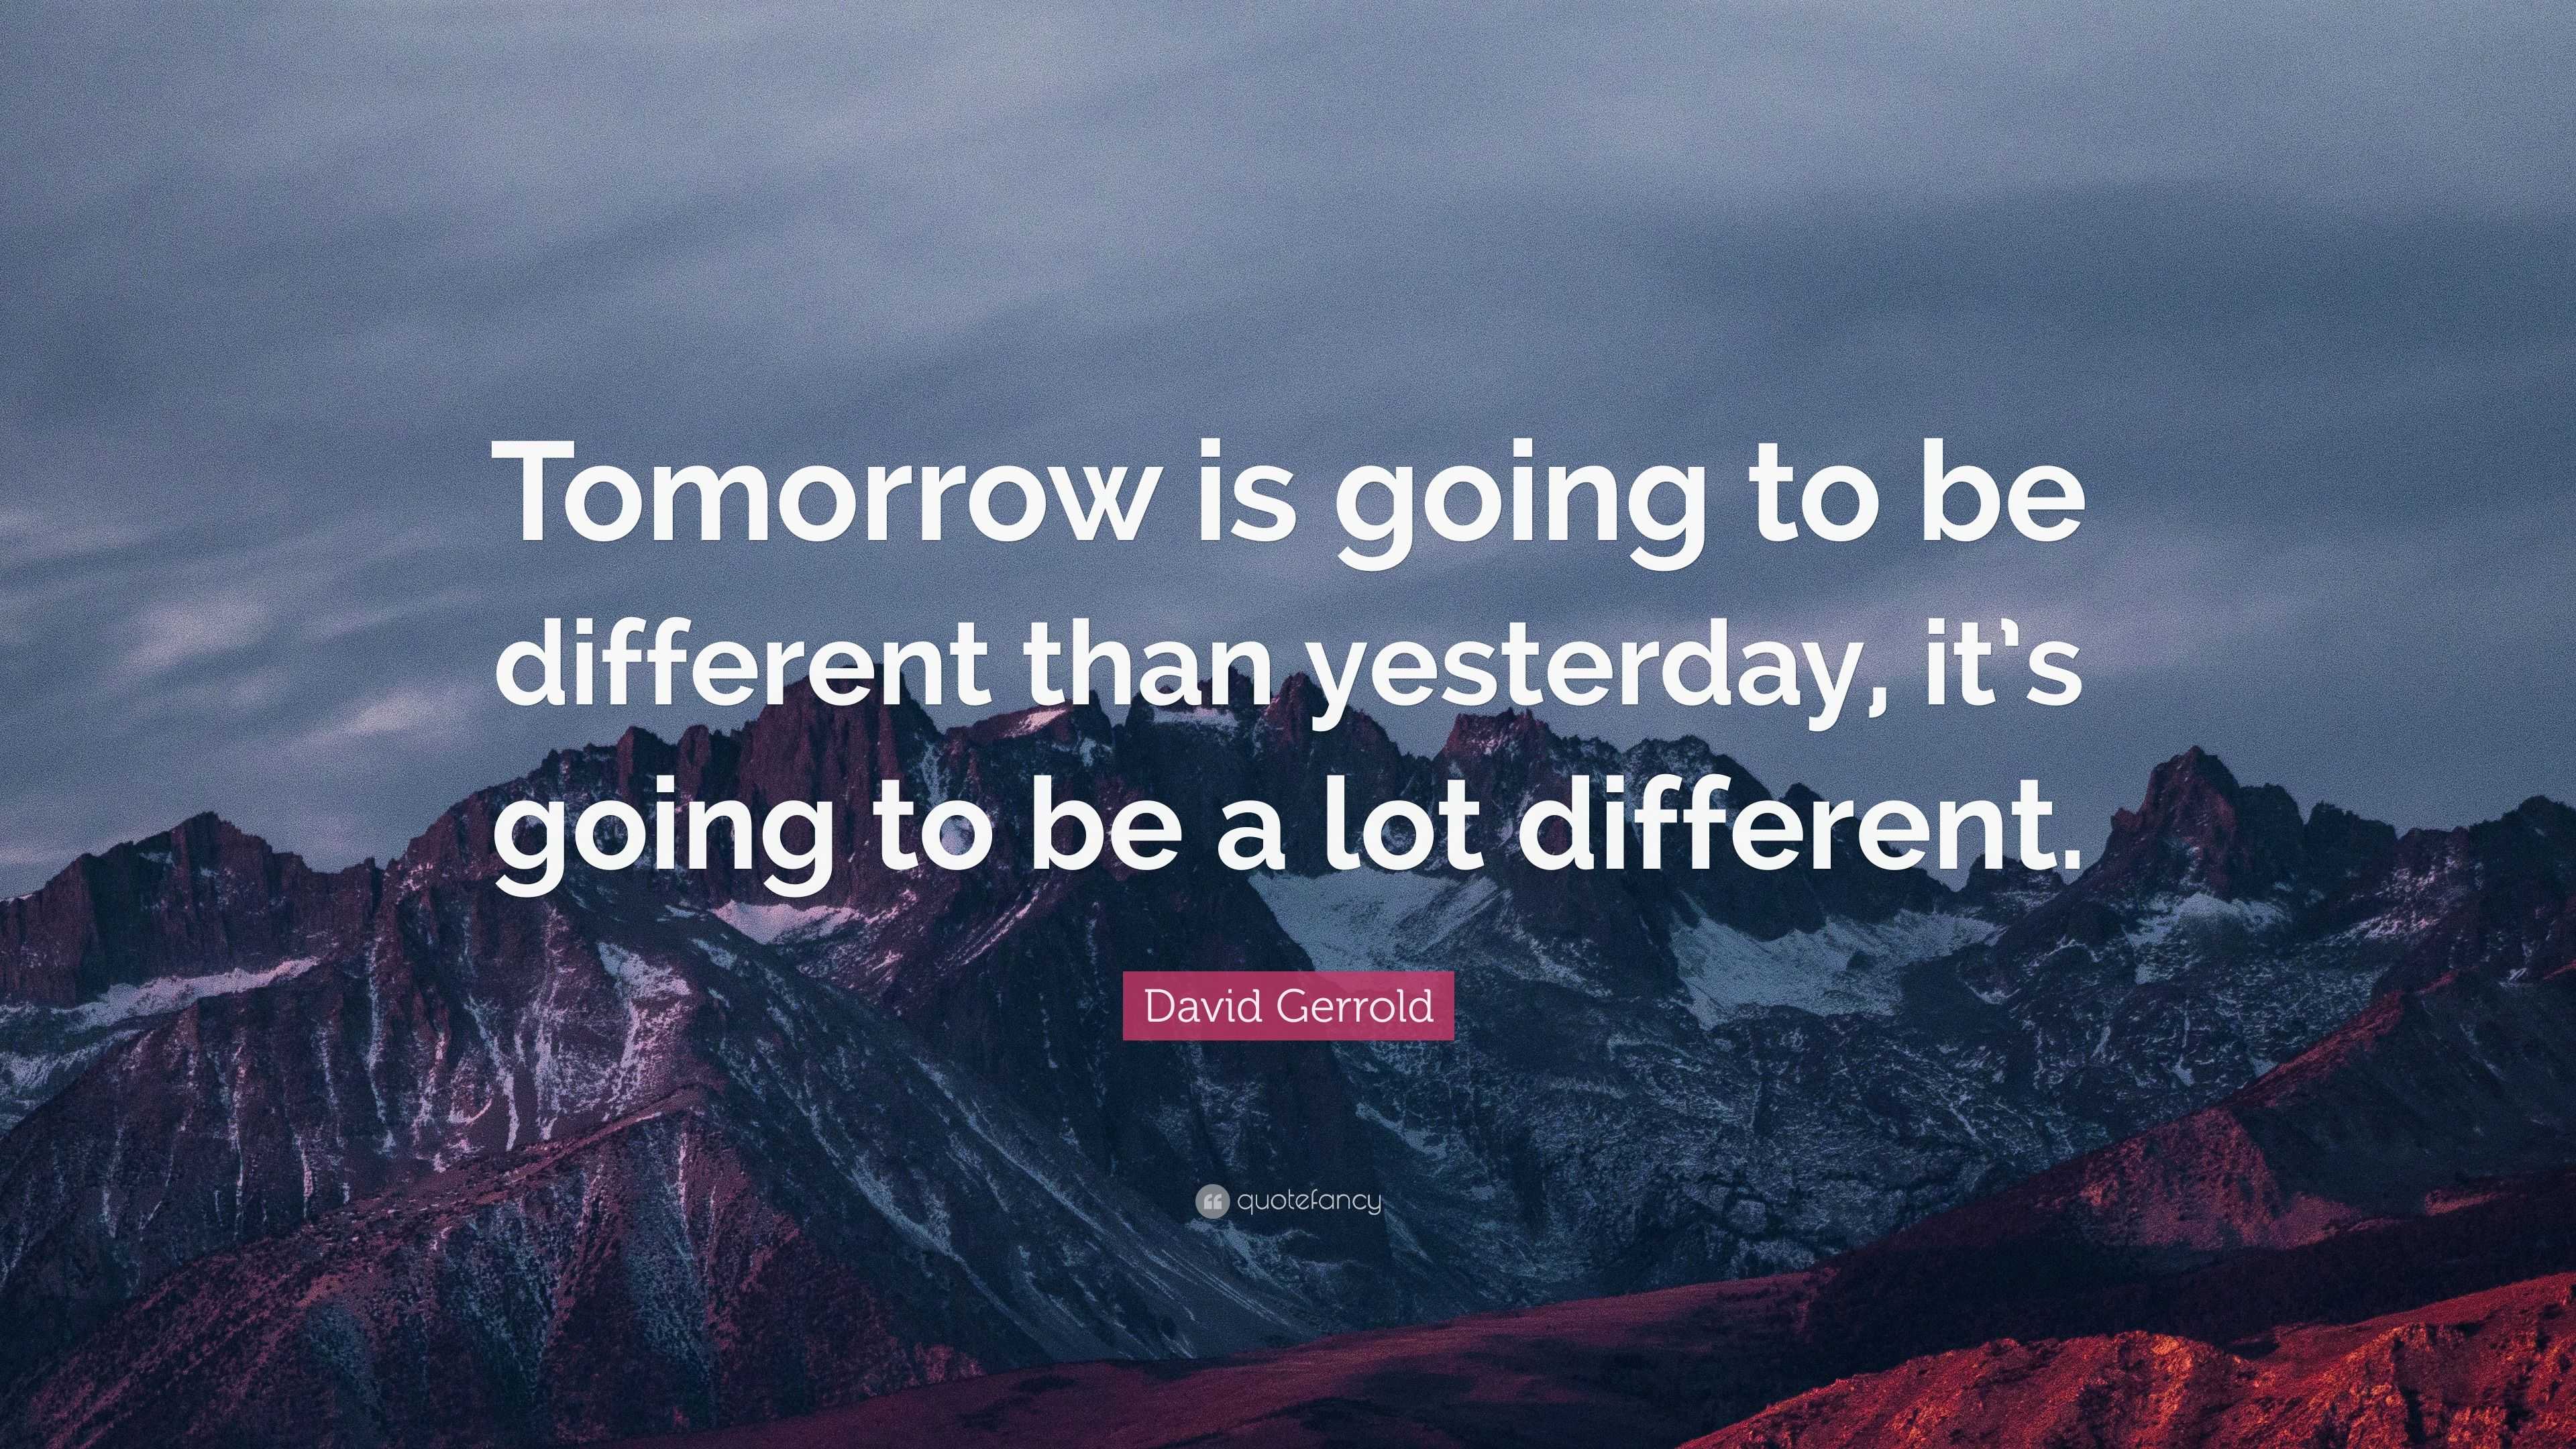 David Gerrold Quote: “Tomorrow is going to be different than yesterday ...